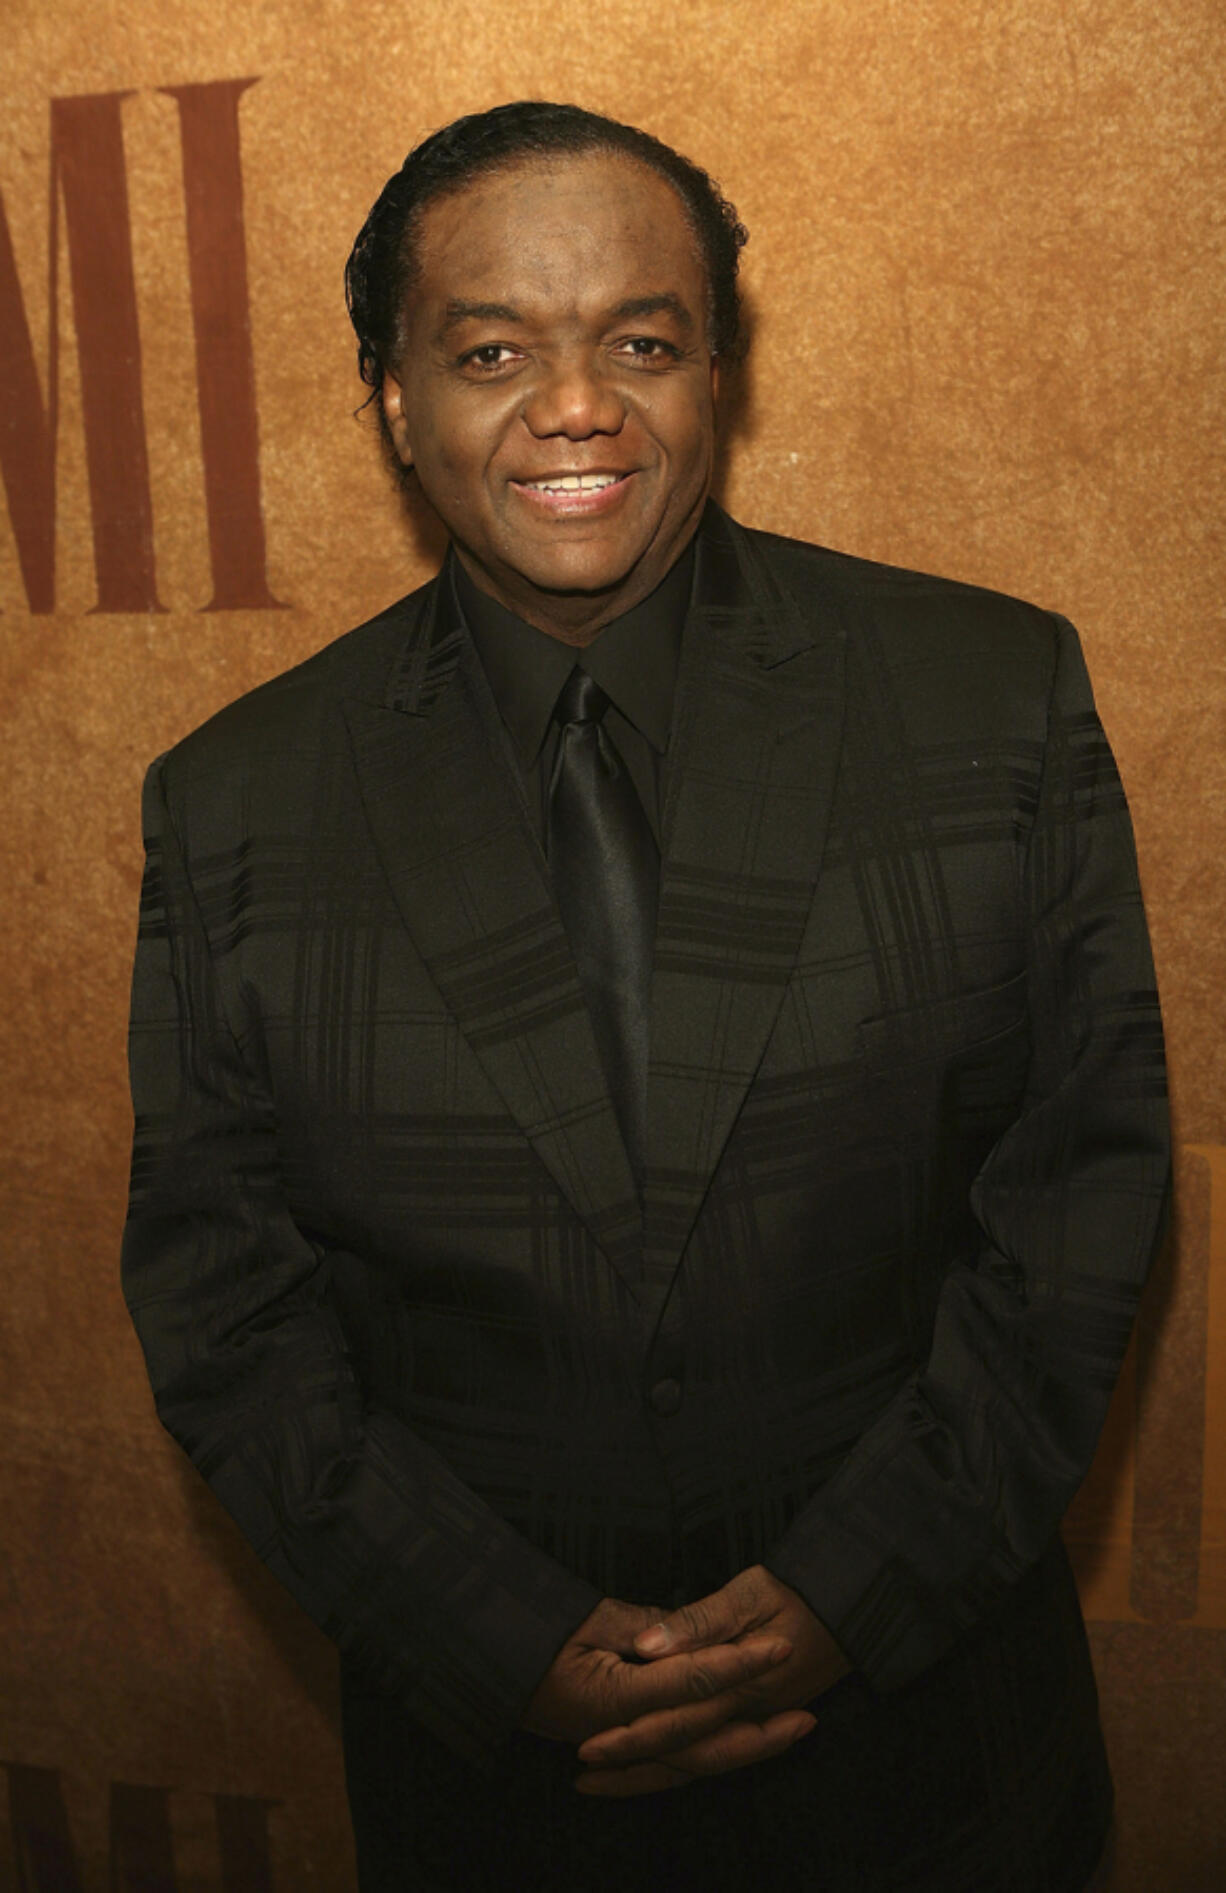 Musician Lamont Dozier attends the 55th Annual BMI Pop Awards at the Regent Beverly Wilshire Hotel on May 15, 2007, in Beverly Hills, Calif.